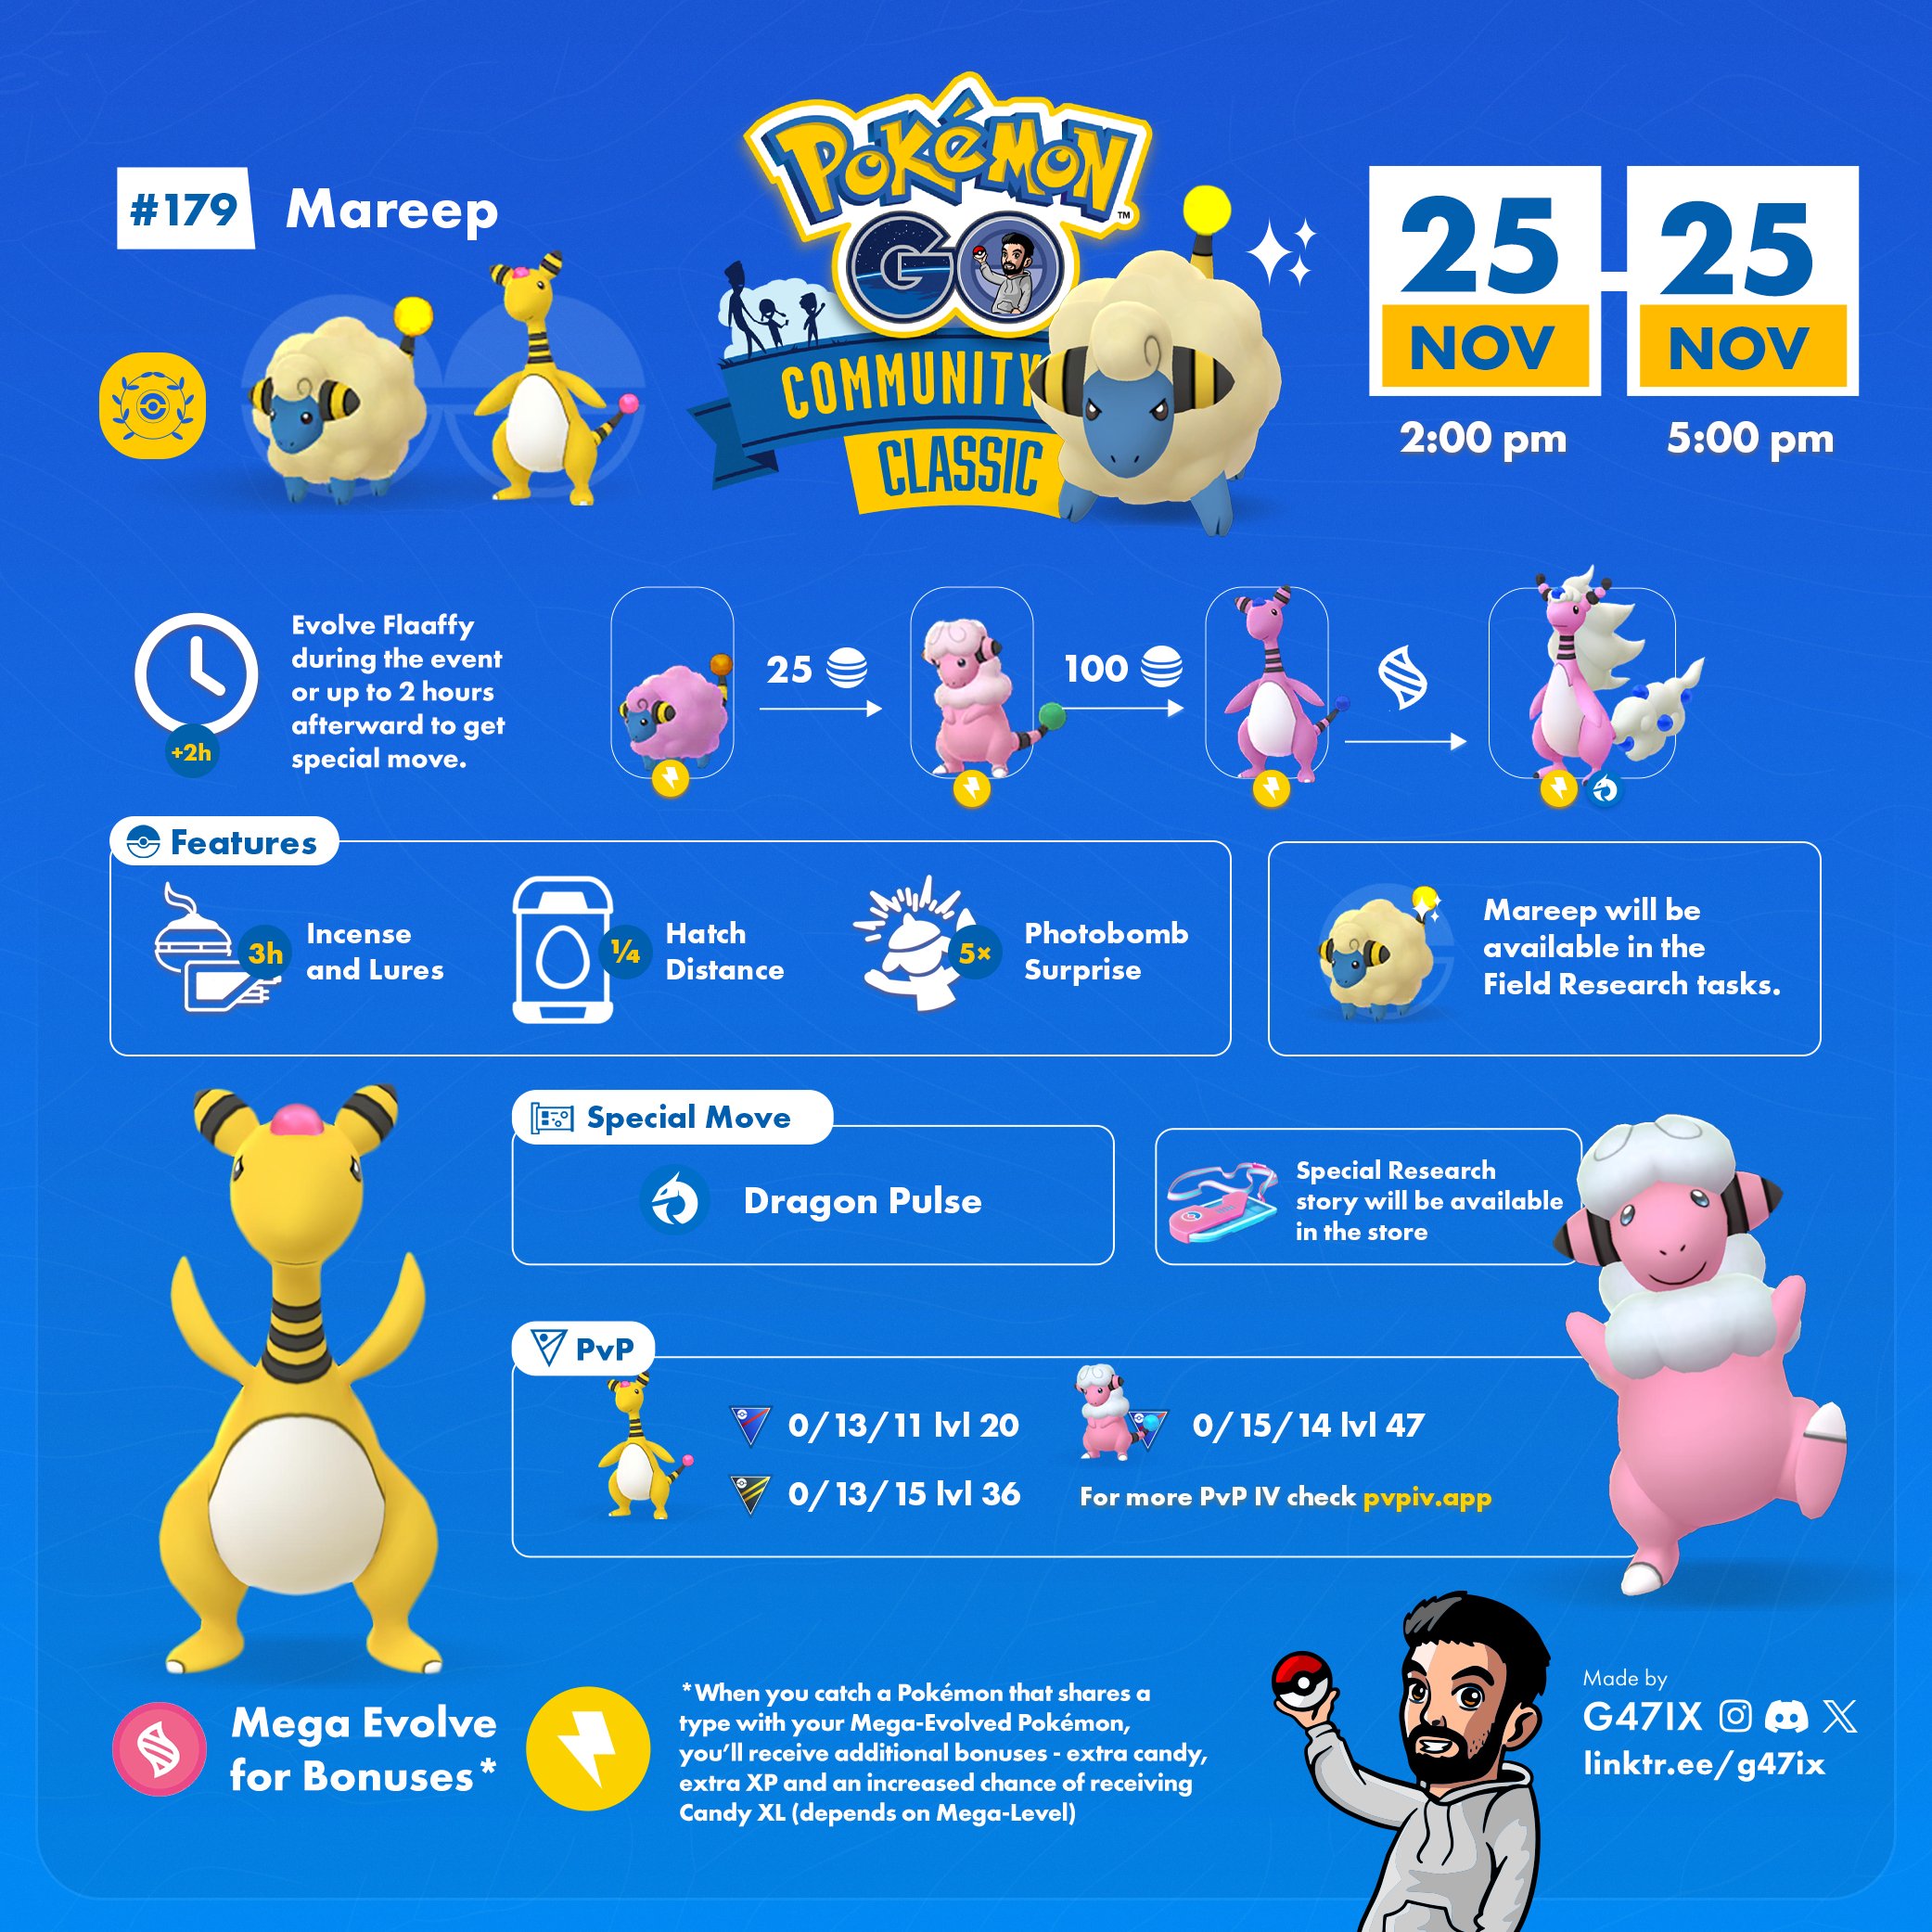 Pokemon GO November 20-26 (2023): Party Up, Mareep Community Day Classic,  and more